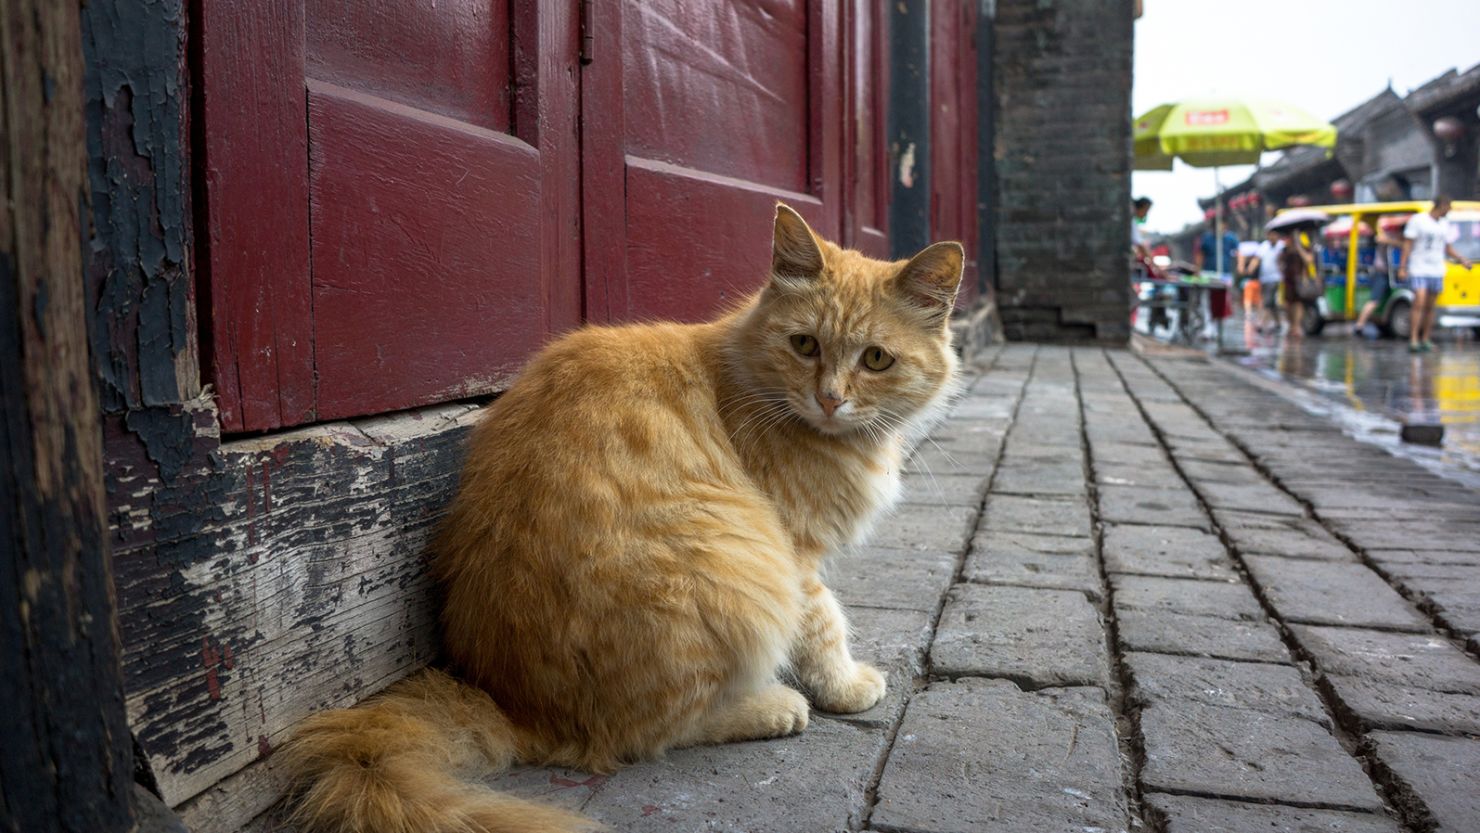 A cat on a street in China